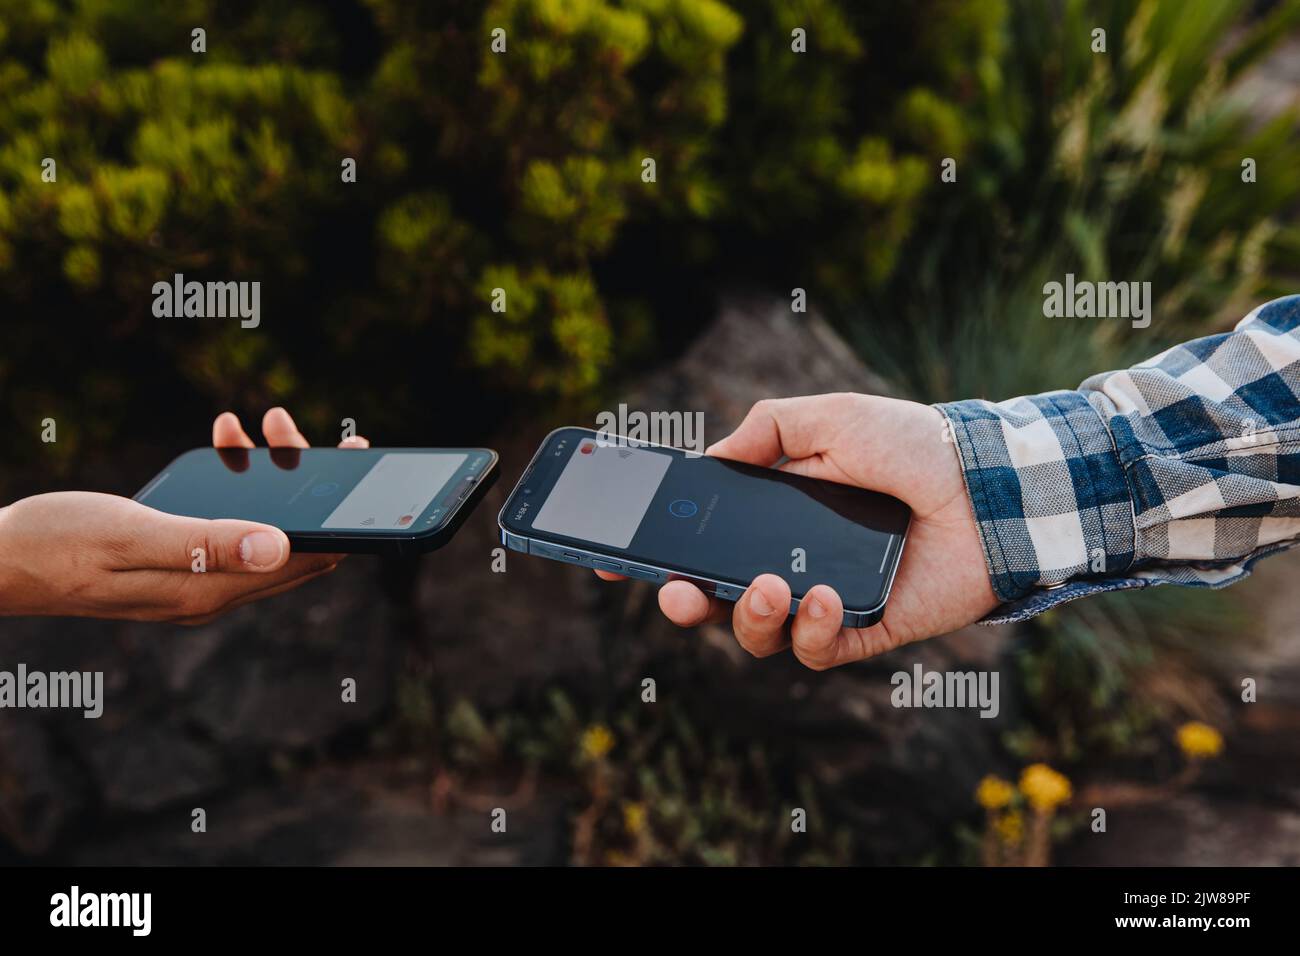 Horishni Plavni, Ukraine - 07, Juny 2022 : Tap to pay. Man and woman using iPhone as a payment terminal, contactless payment concept Stock Photo